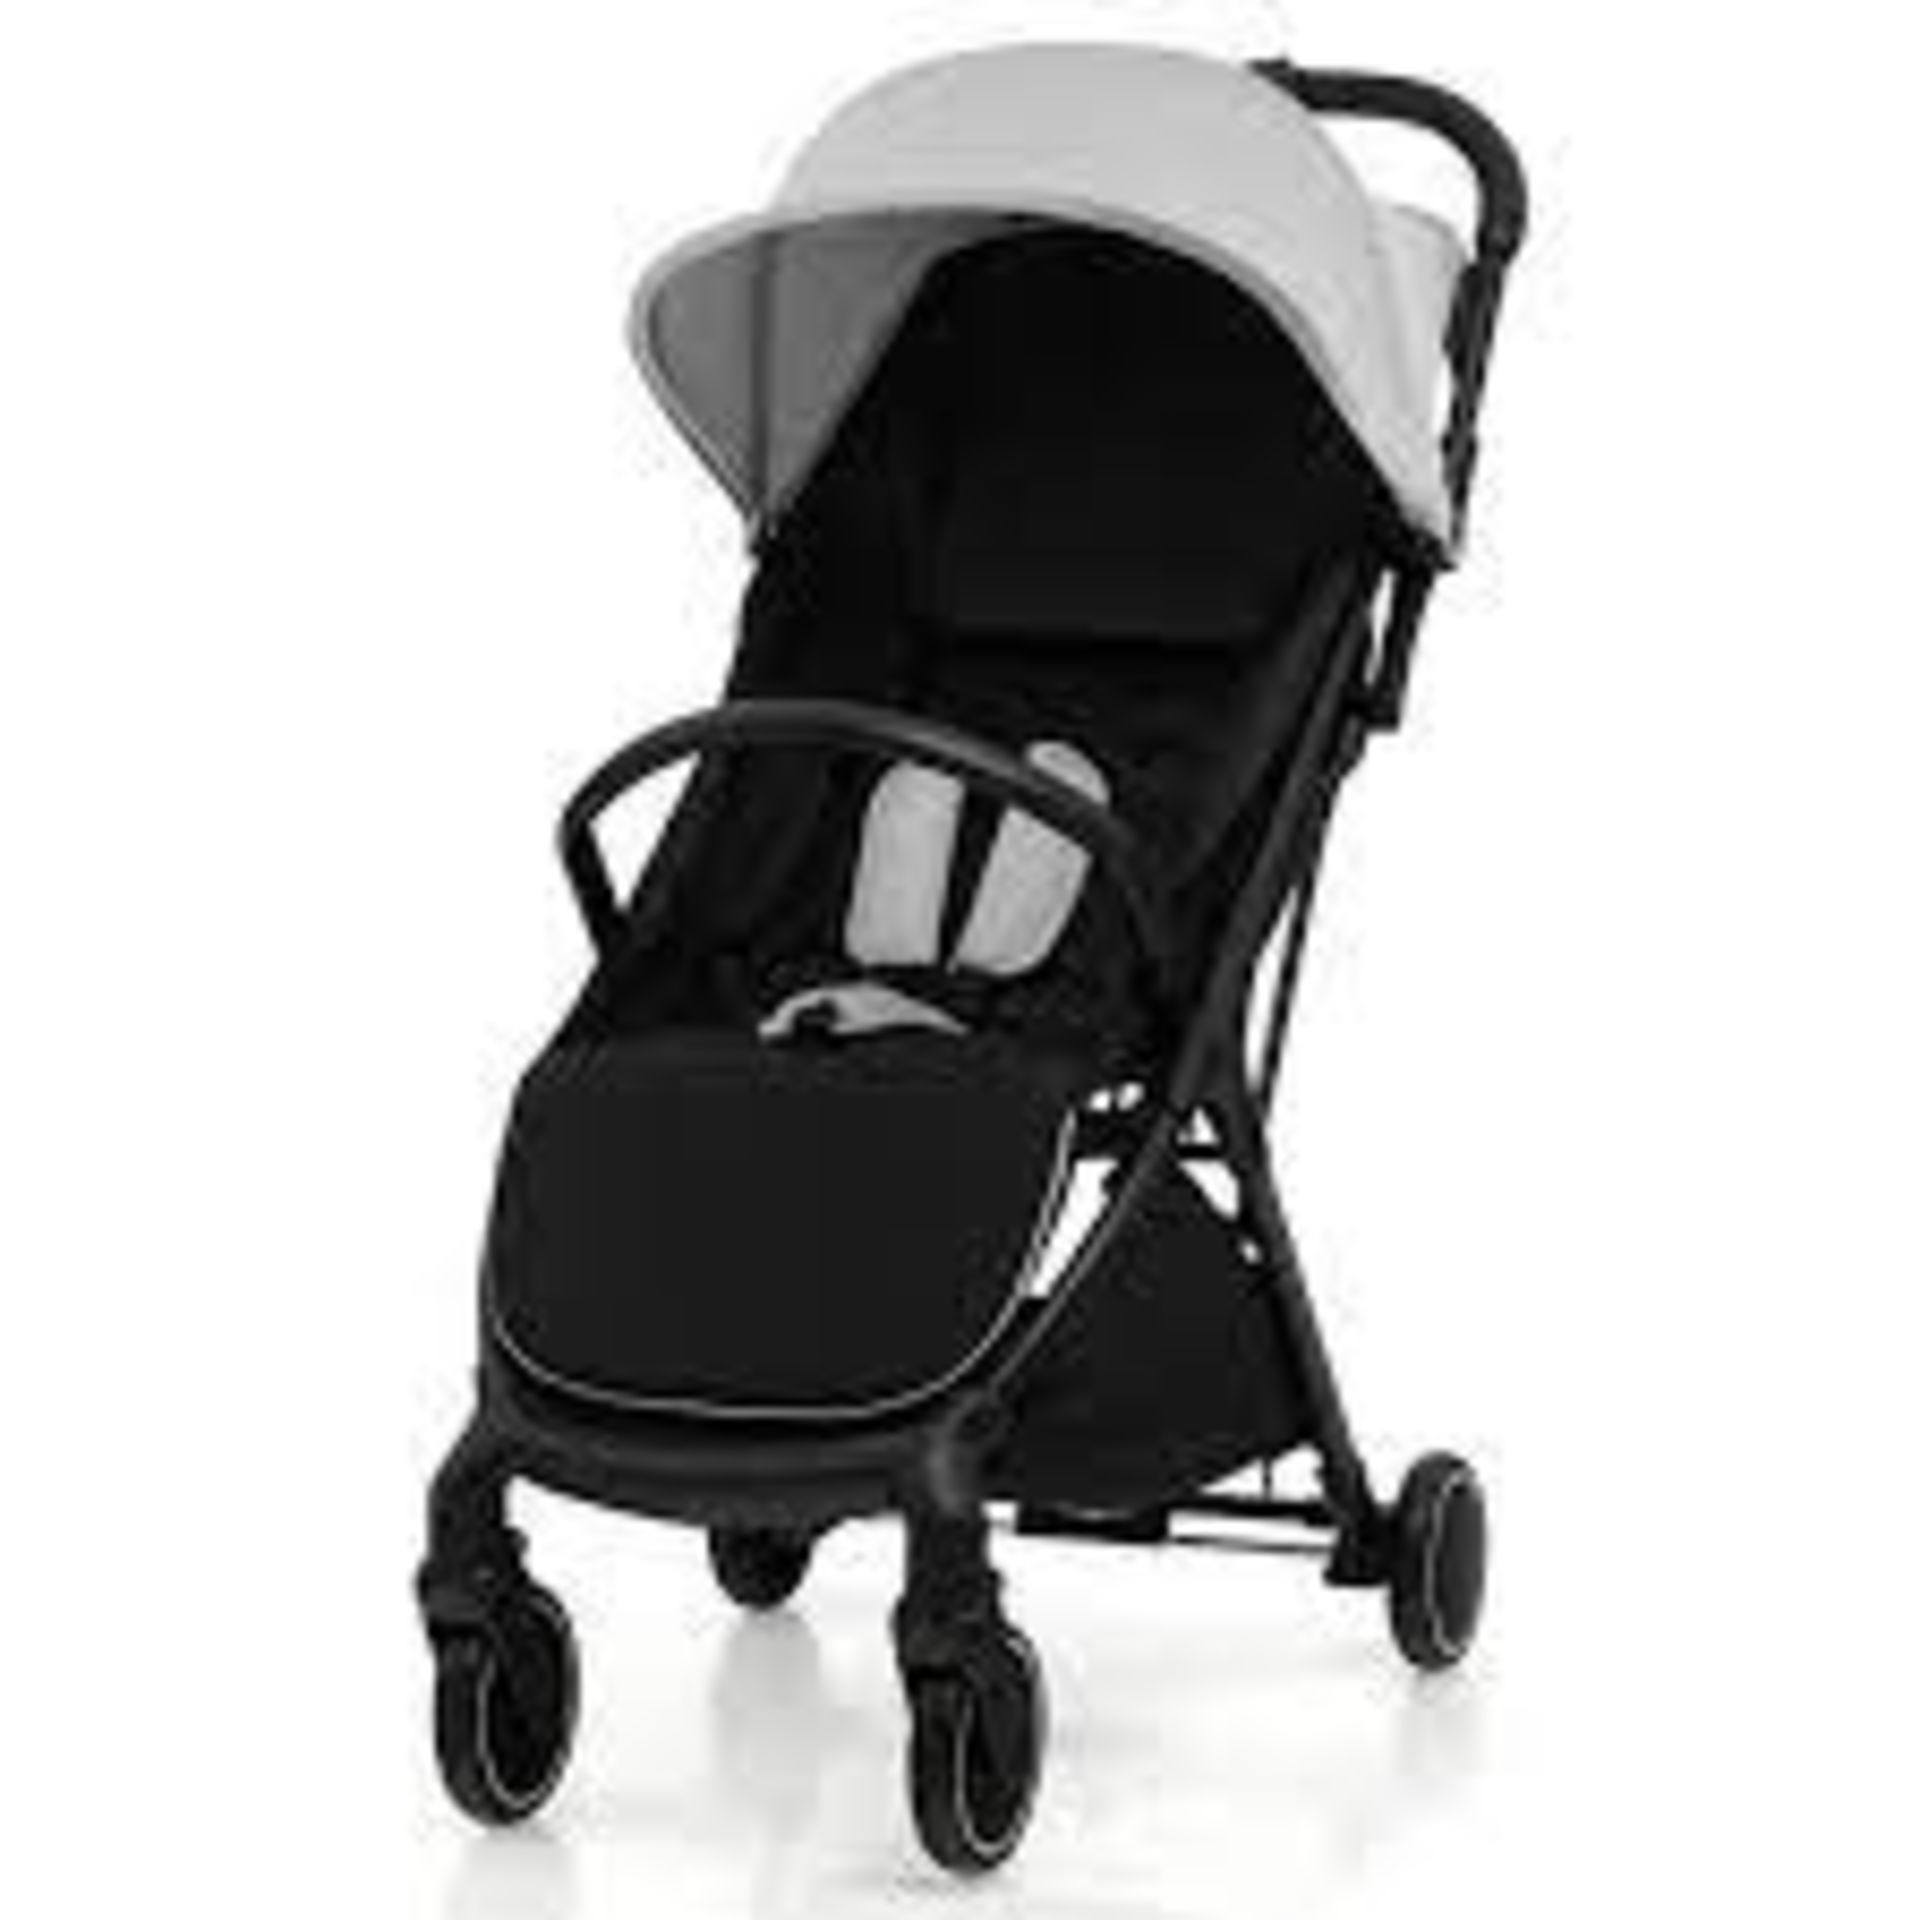 Lightweight Baby Stroller with Detachable Seat Cover-Grey. - ER54. Go anywhere with this portable